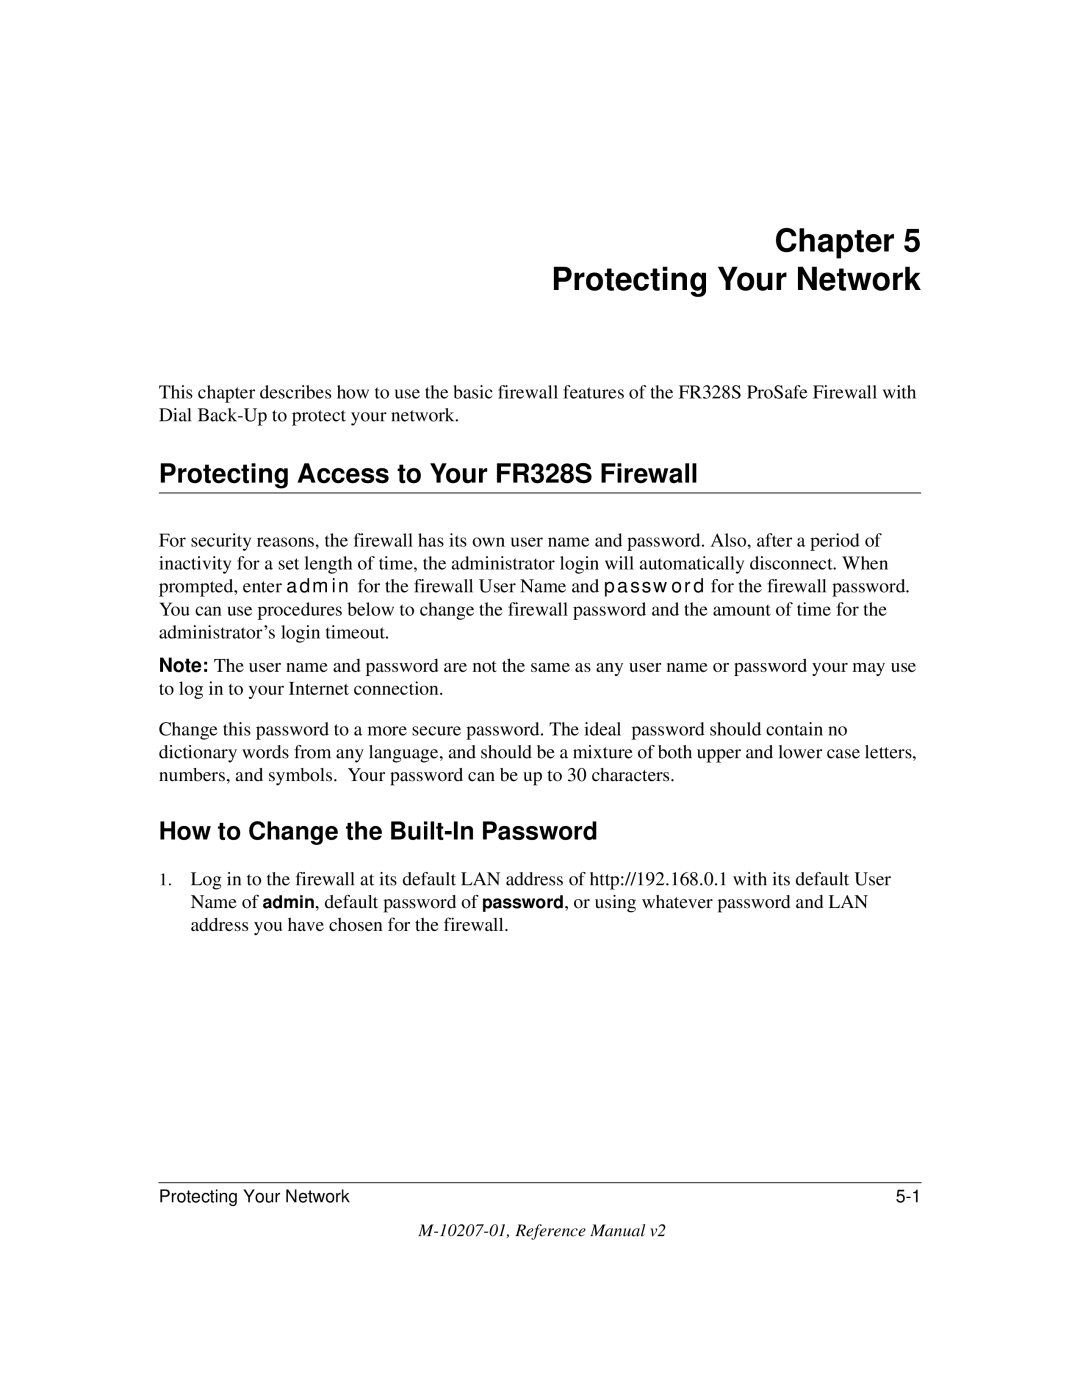 NETGEAR Chapter Protecting Your Network, Protecting Access to Your FR328S Firewall, How to Change the Built-In Password 